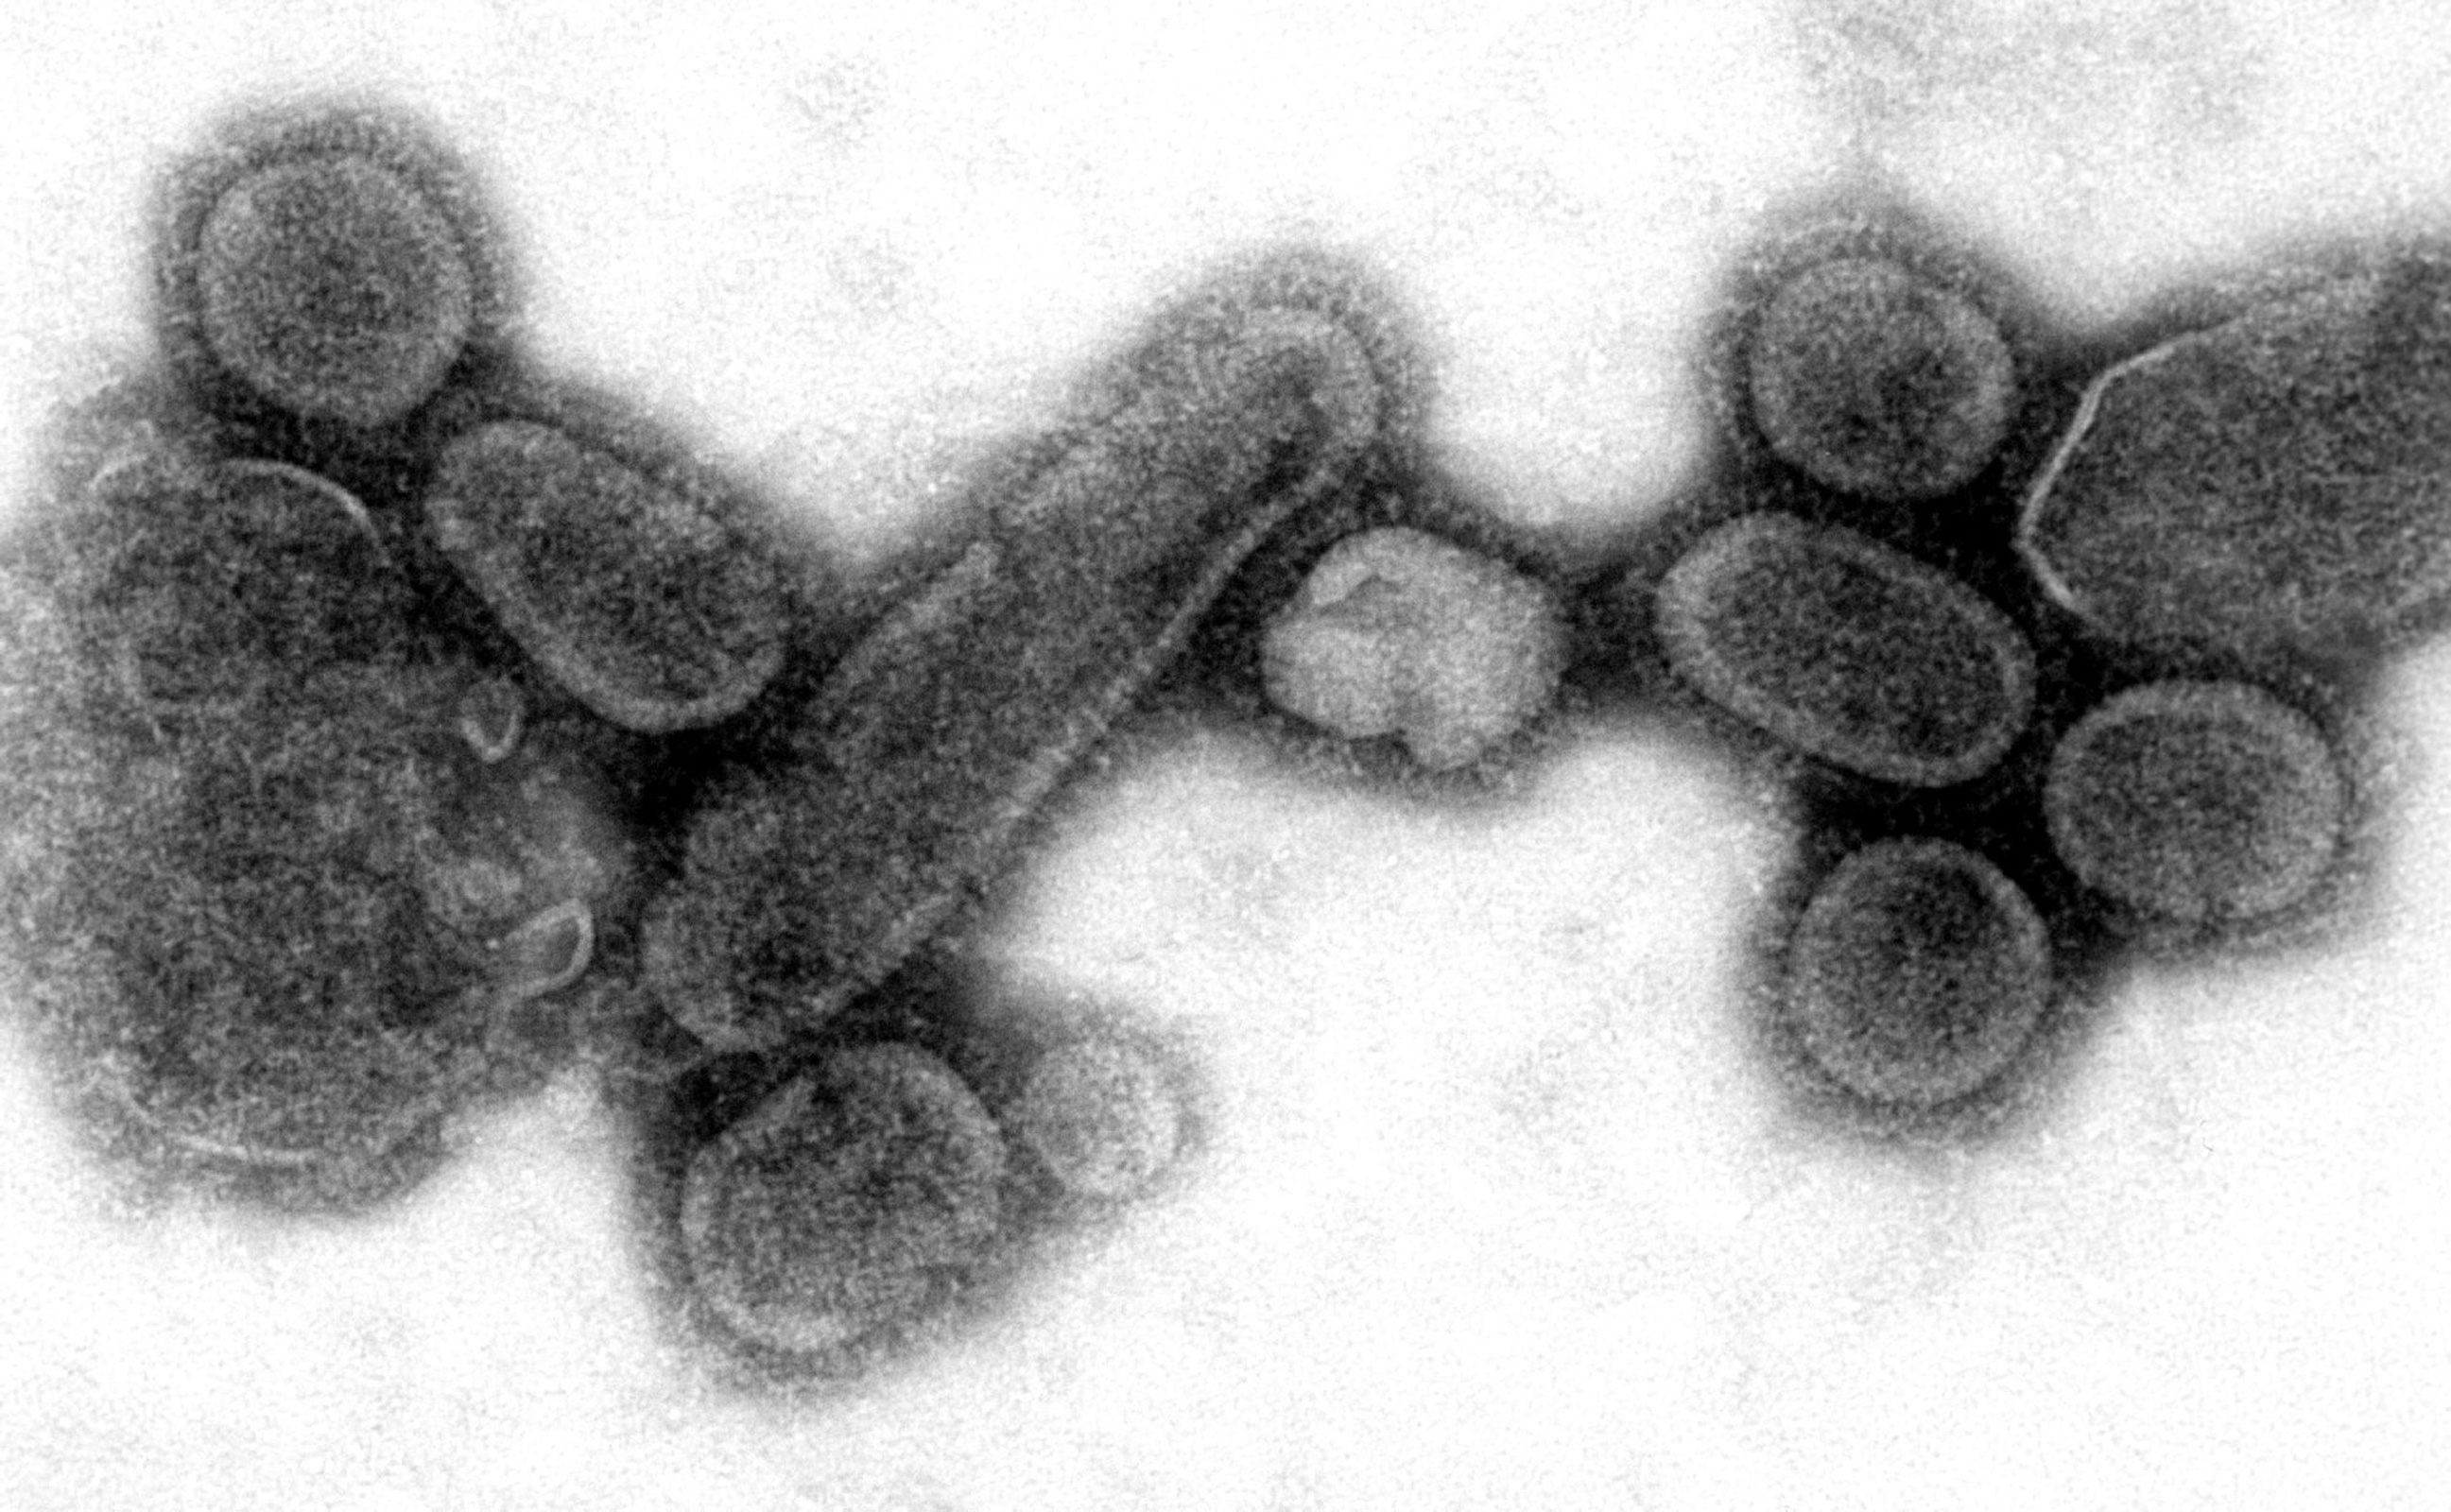 An electron micrograph showing recreated 1918 influenza virions